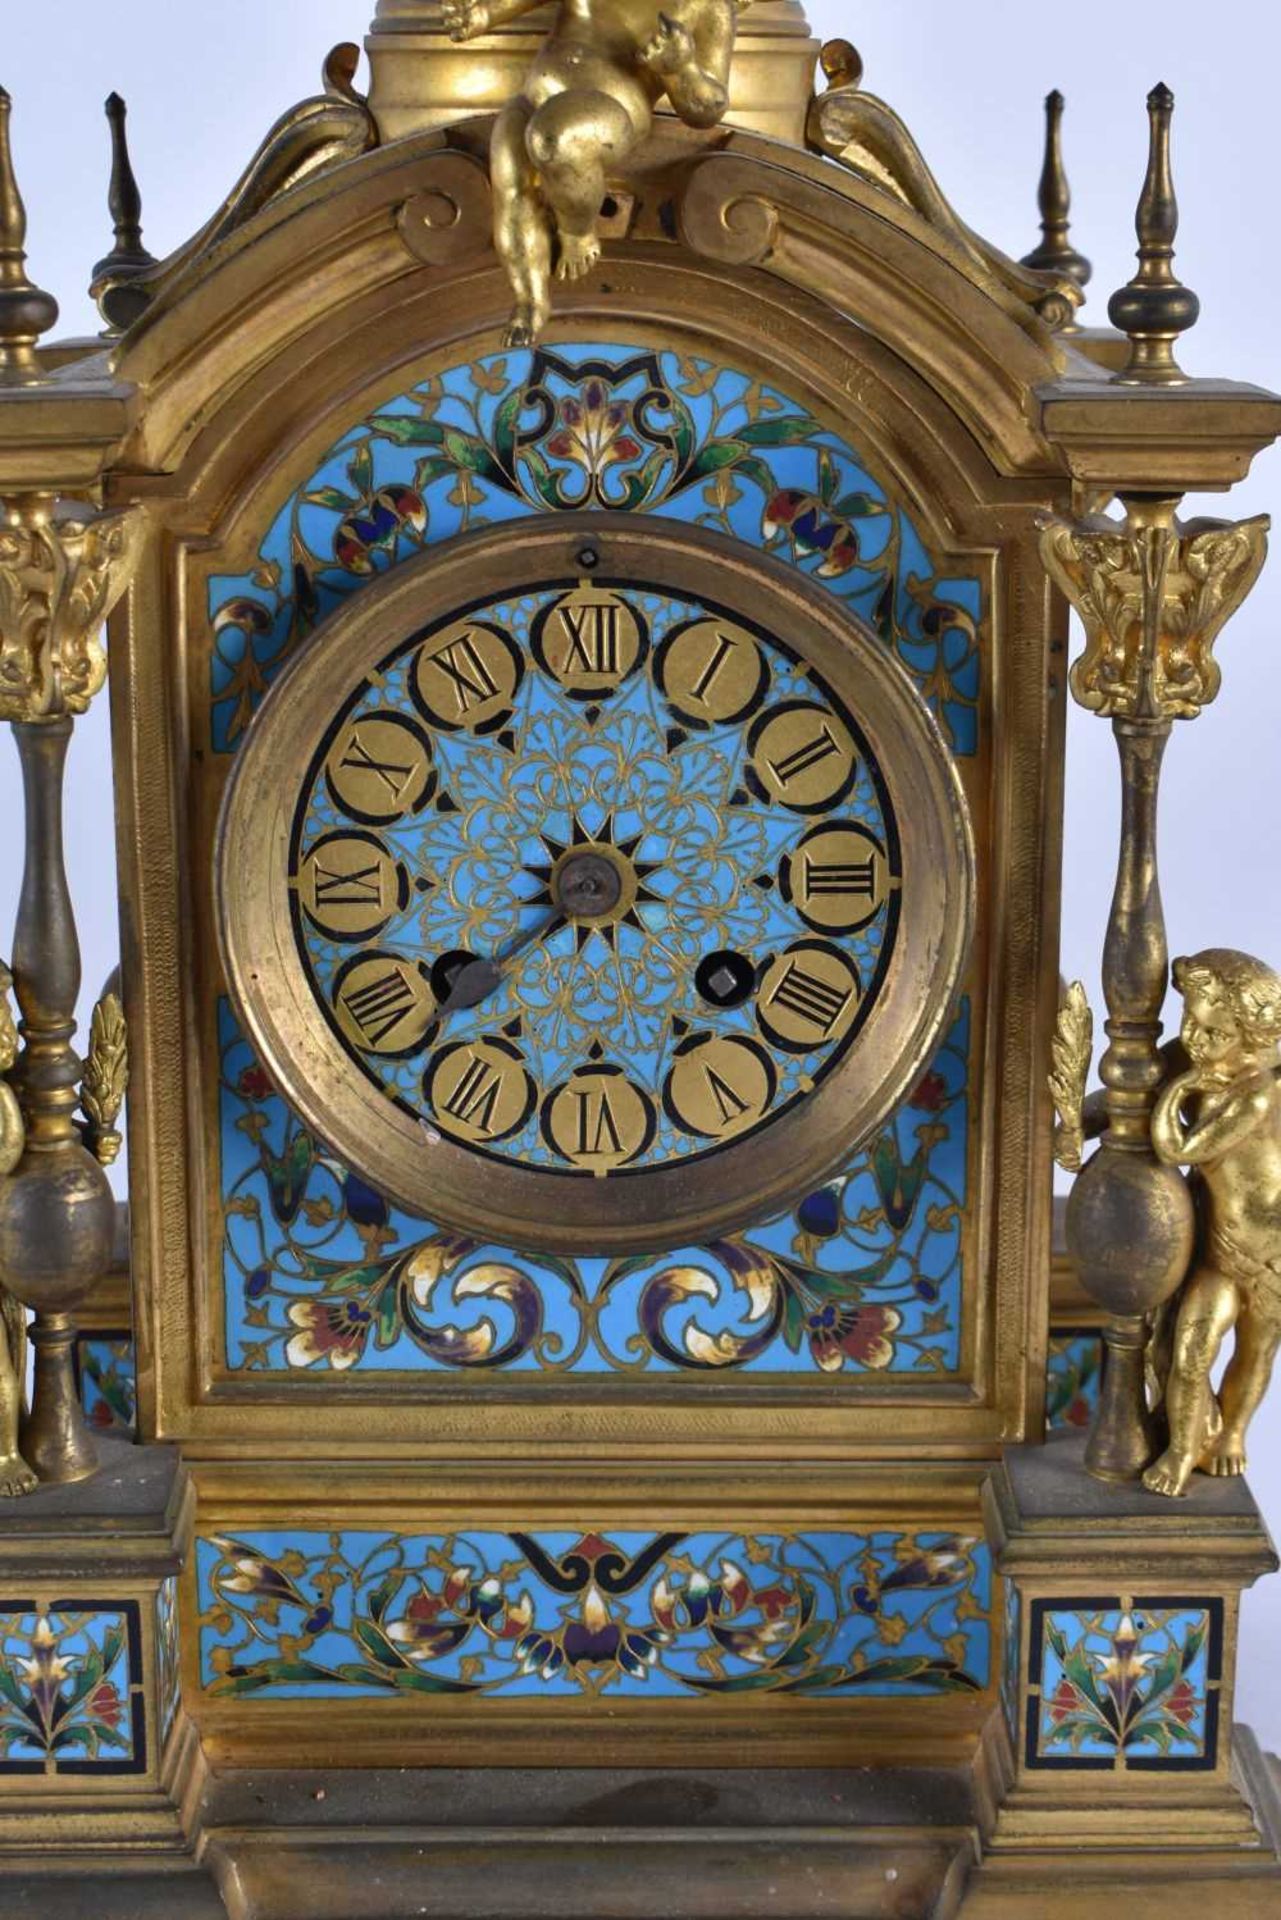 A FINE 19TH CENTURY FRENCH ORMOLU AND CHAMPLEVE ENAMEL CLOCK GARNITURE formed with putti amongst - Image 3 of 9